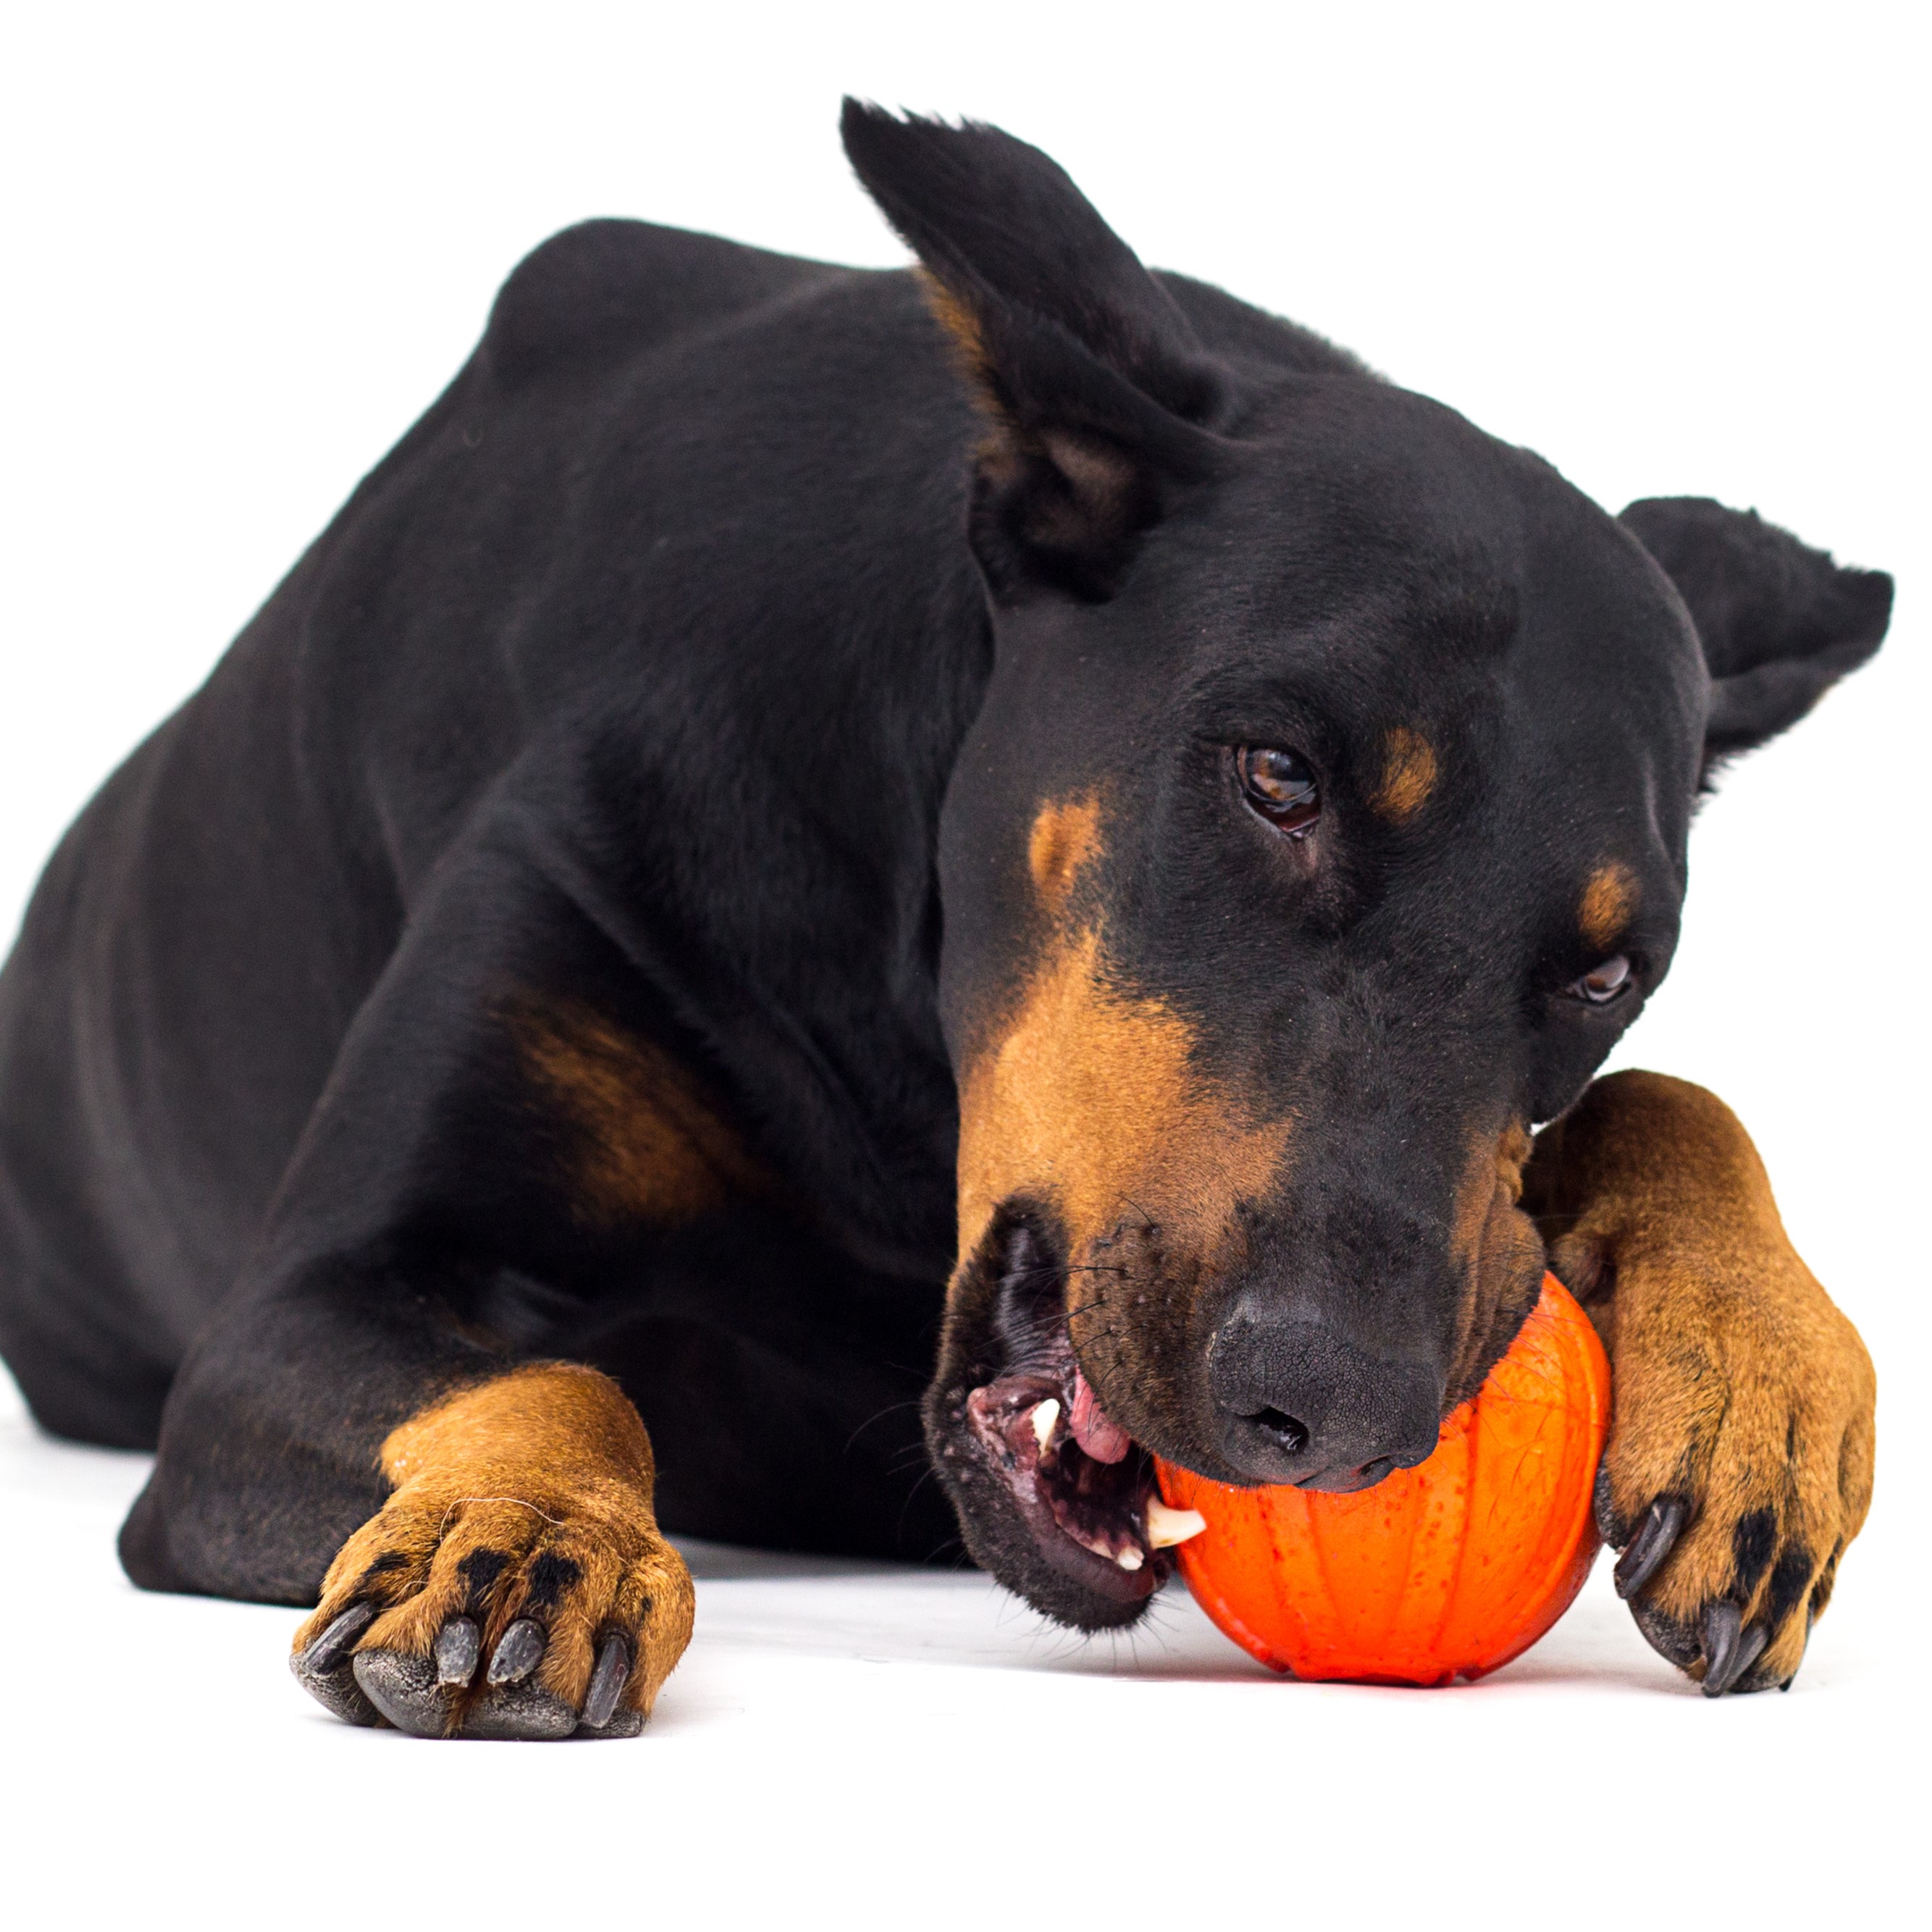 Dog Chewing a Ball